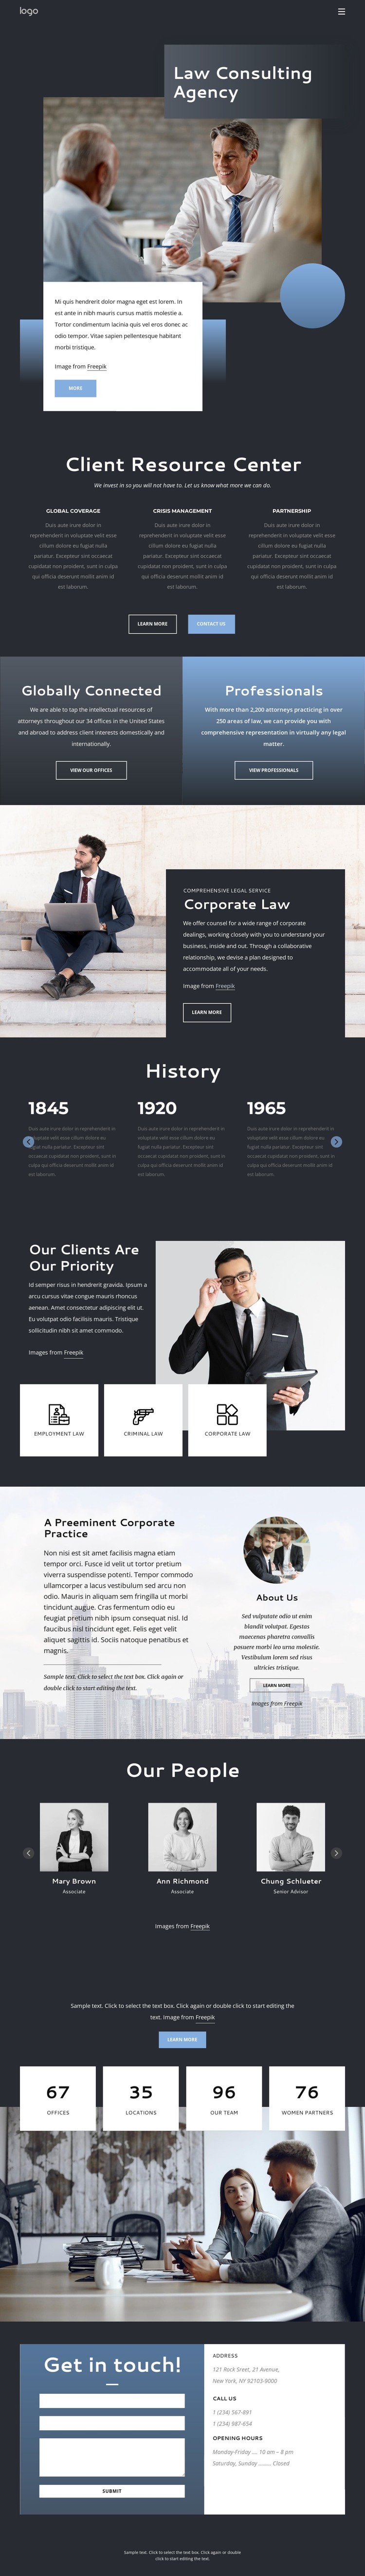 Law consulting agency Web Design